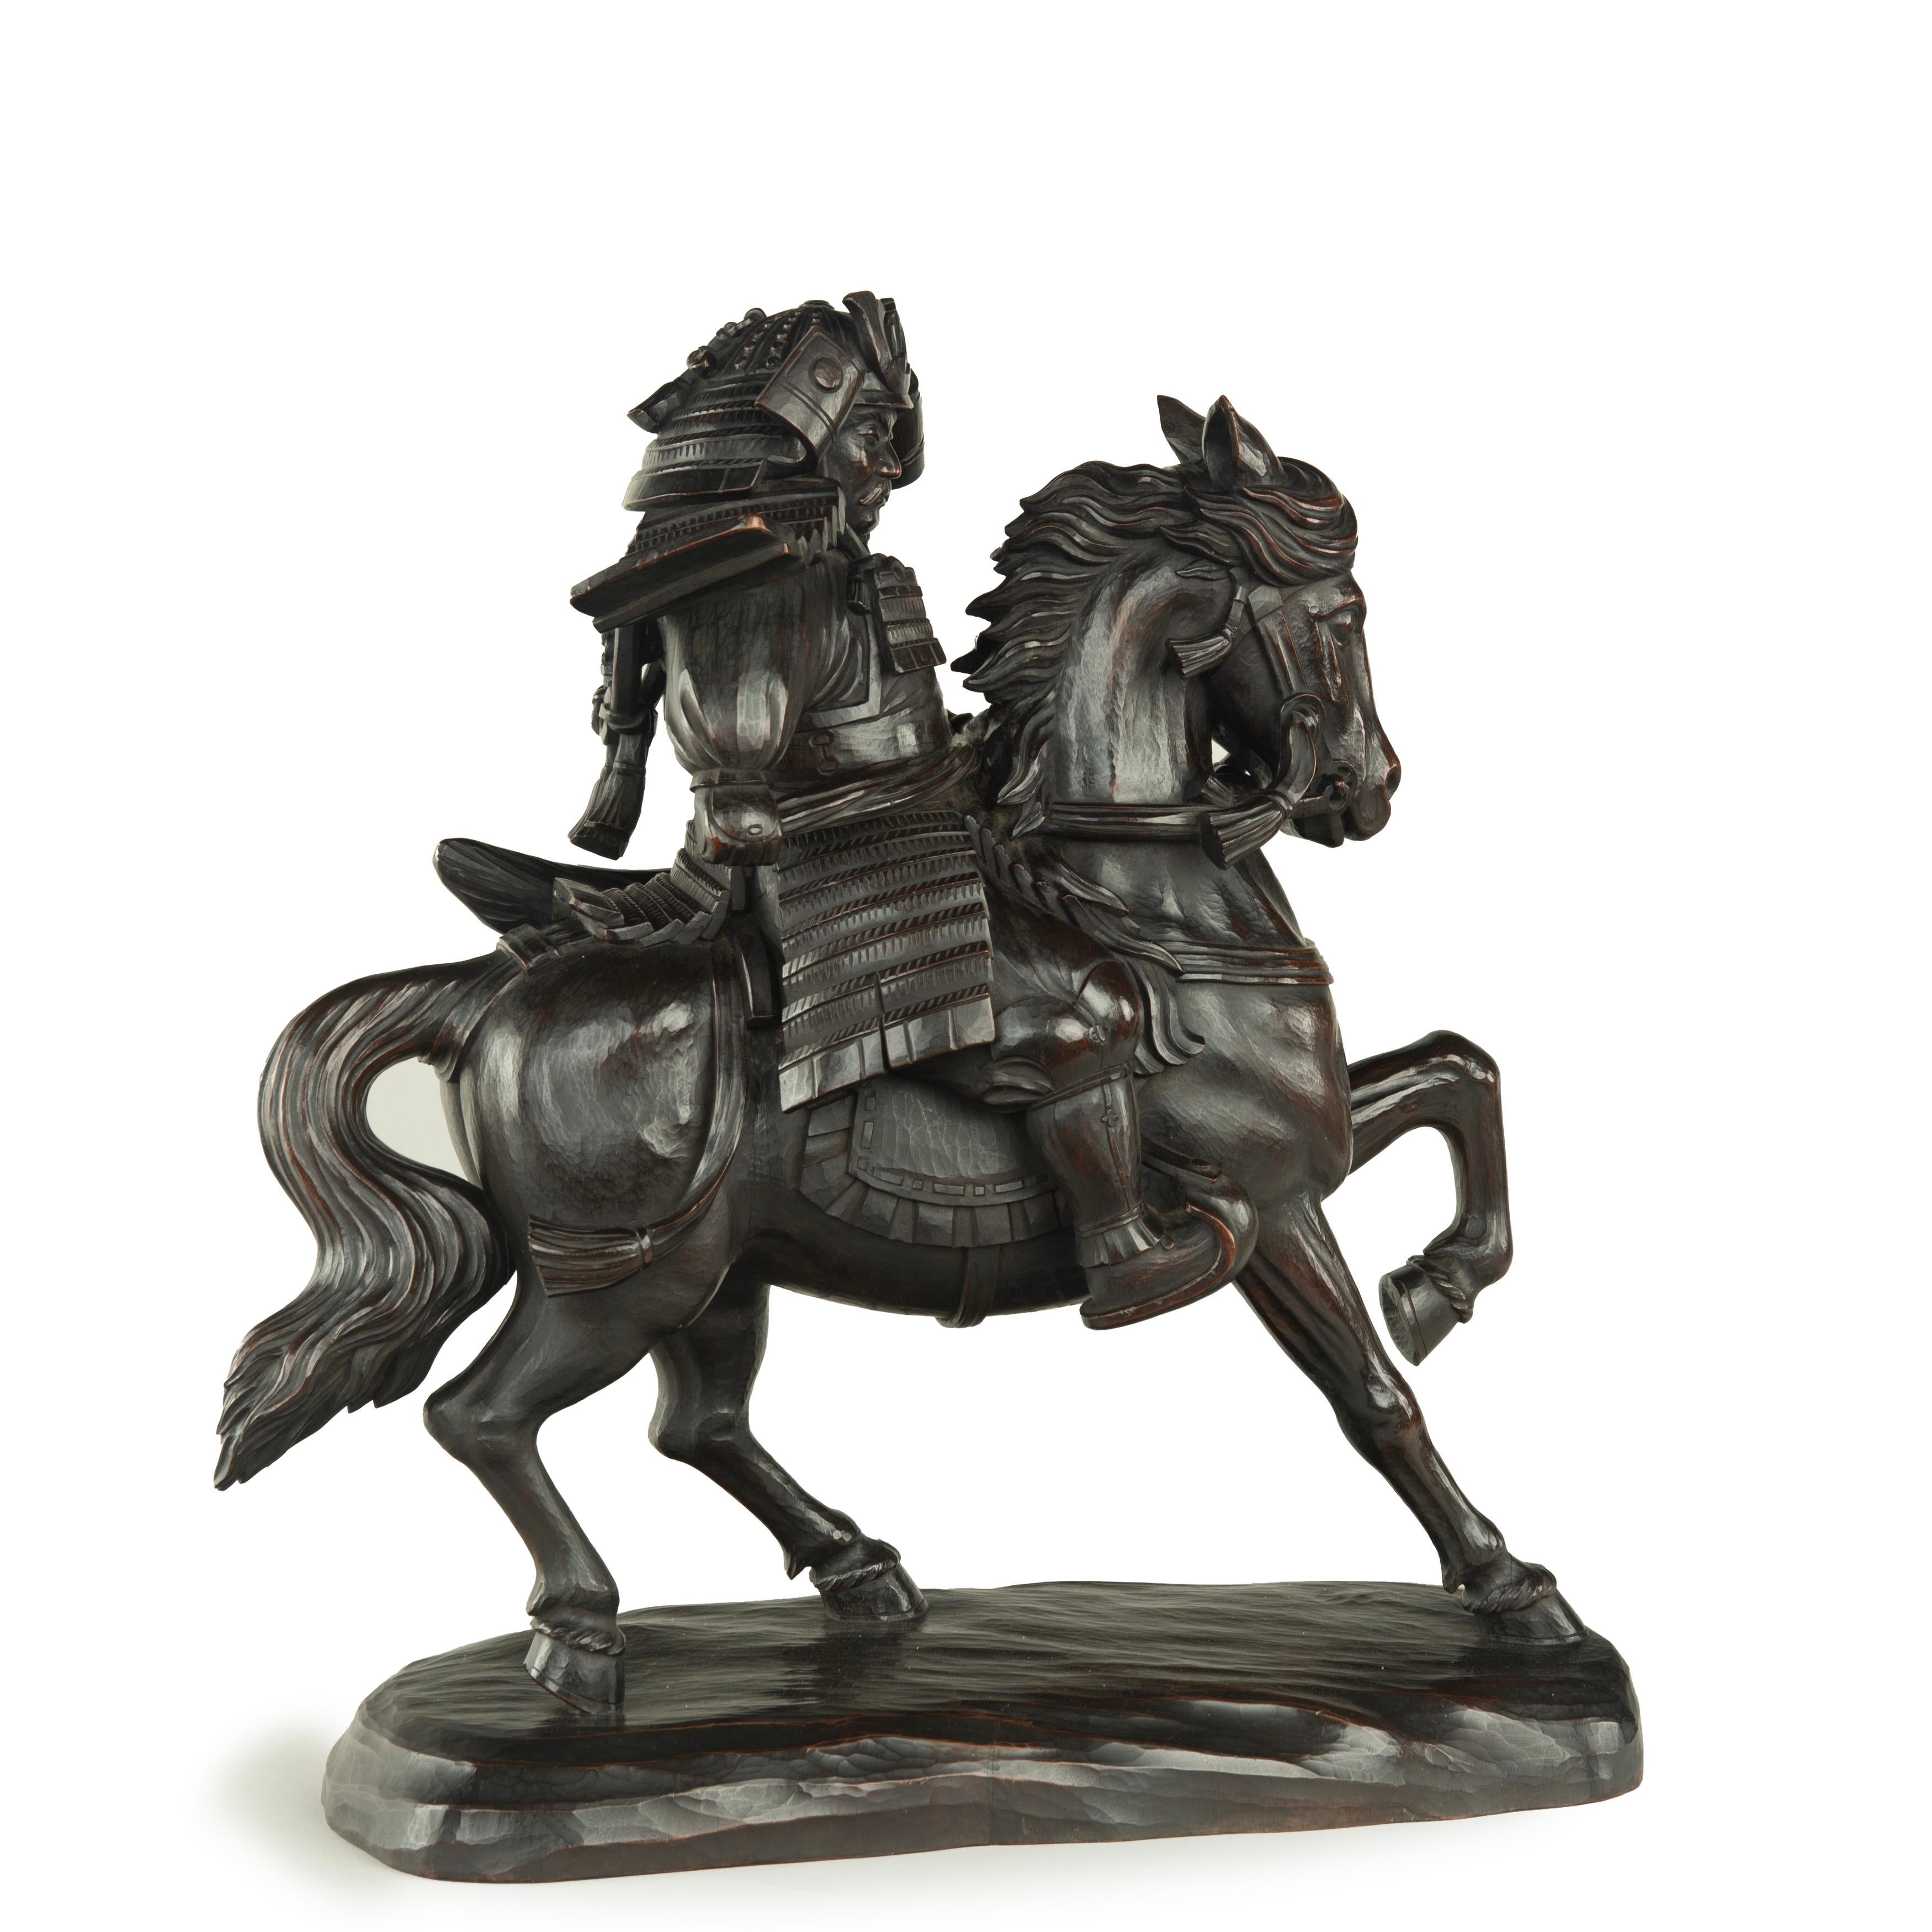 
A powerful Japanese equestrian wood carving of a samurai by Yoshida Issen/Isshun, depicted in full armour on a prancing, muscular war horse, signed 一雋刀” ISSEN TO”.  Japanese, circa 1920.

Footnote: Yoshida Issen (1885-1956) was from a family of